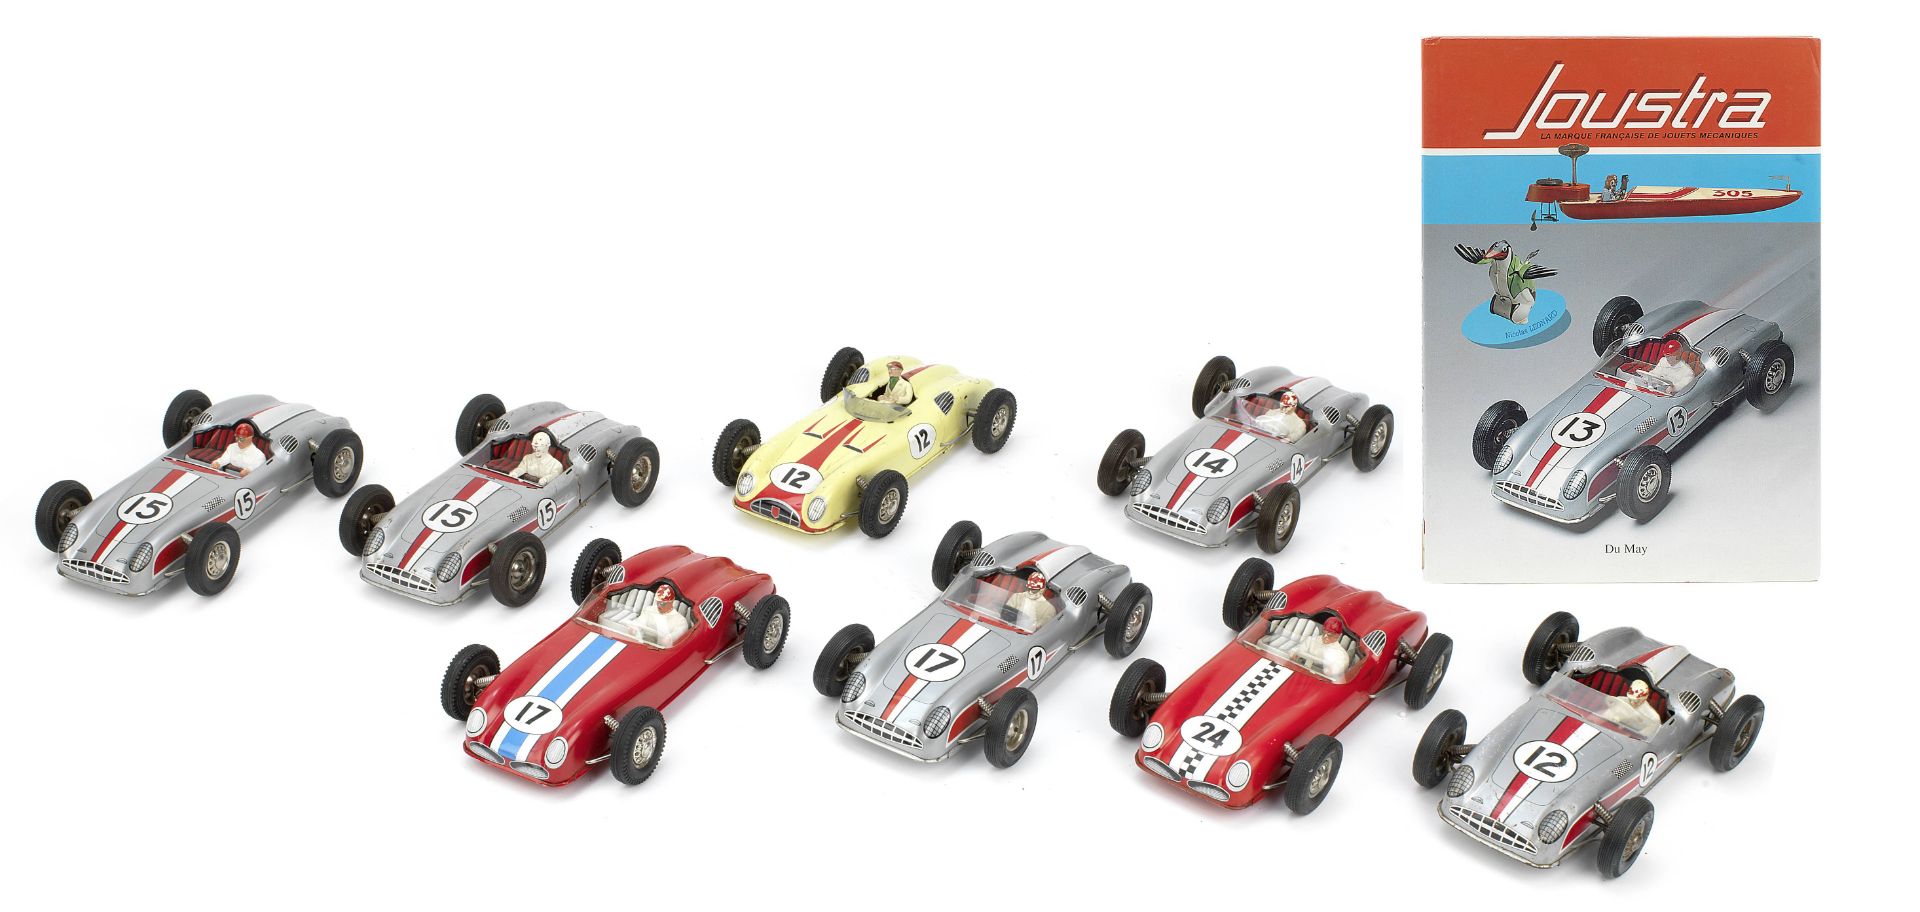 Eight friction-powered tinplate clockwork race-car toys by Joustra of France, 1960s, ((10))